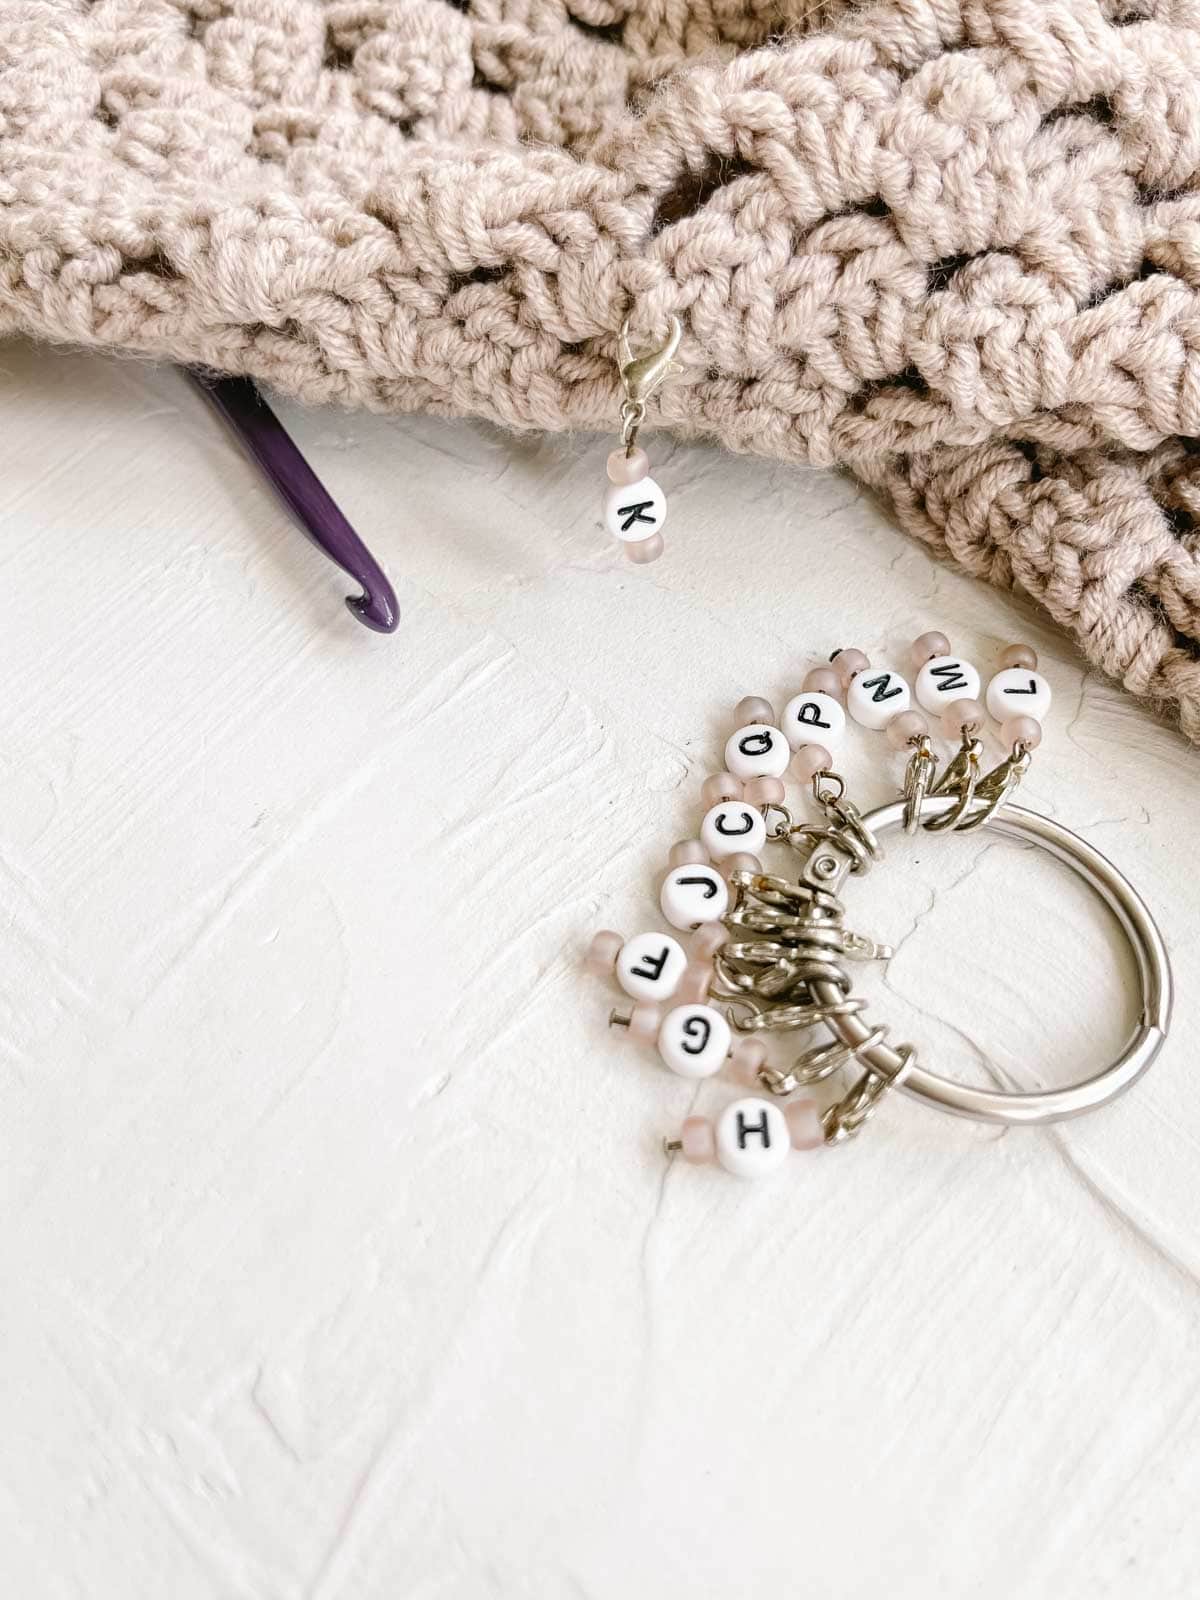 DIY personalized crochet stitch marker made from a keychain and craft beads with letters.